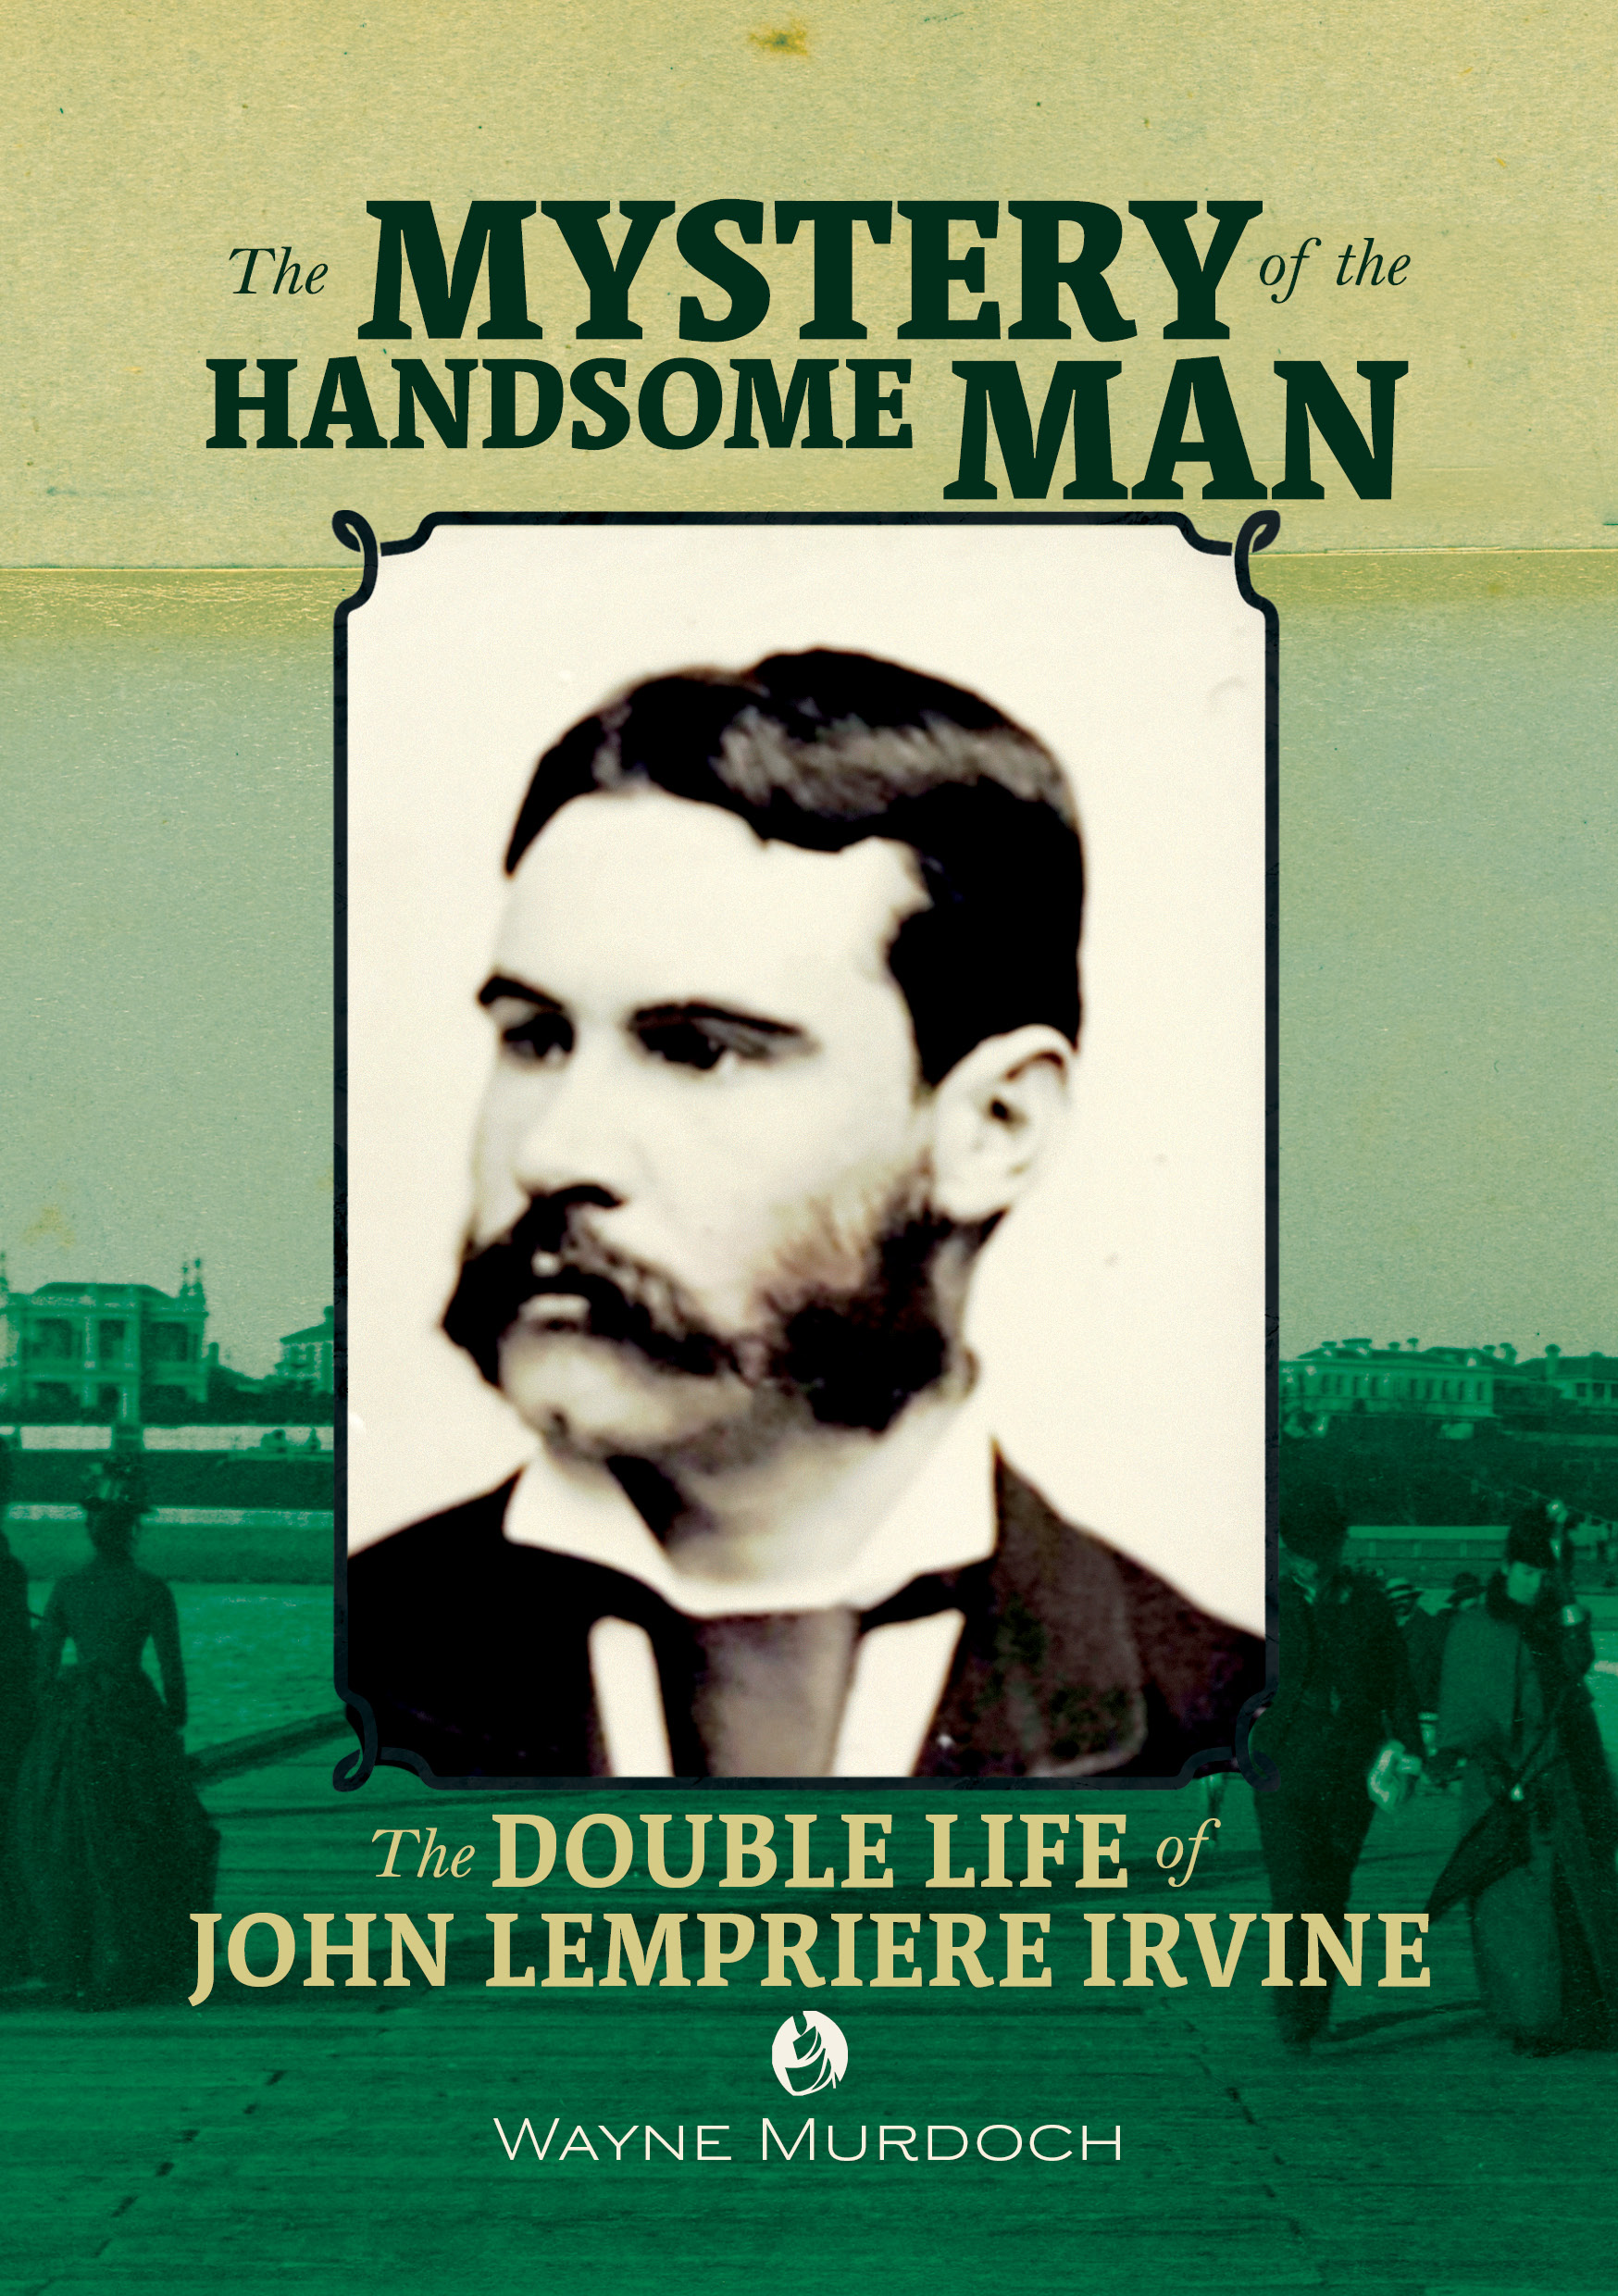 The Mystery of the Handsome Man